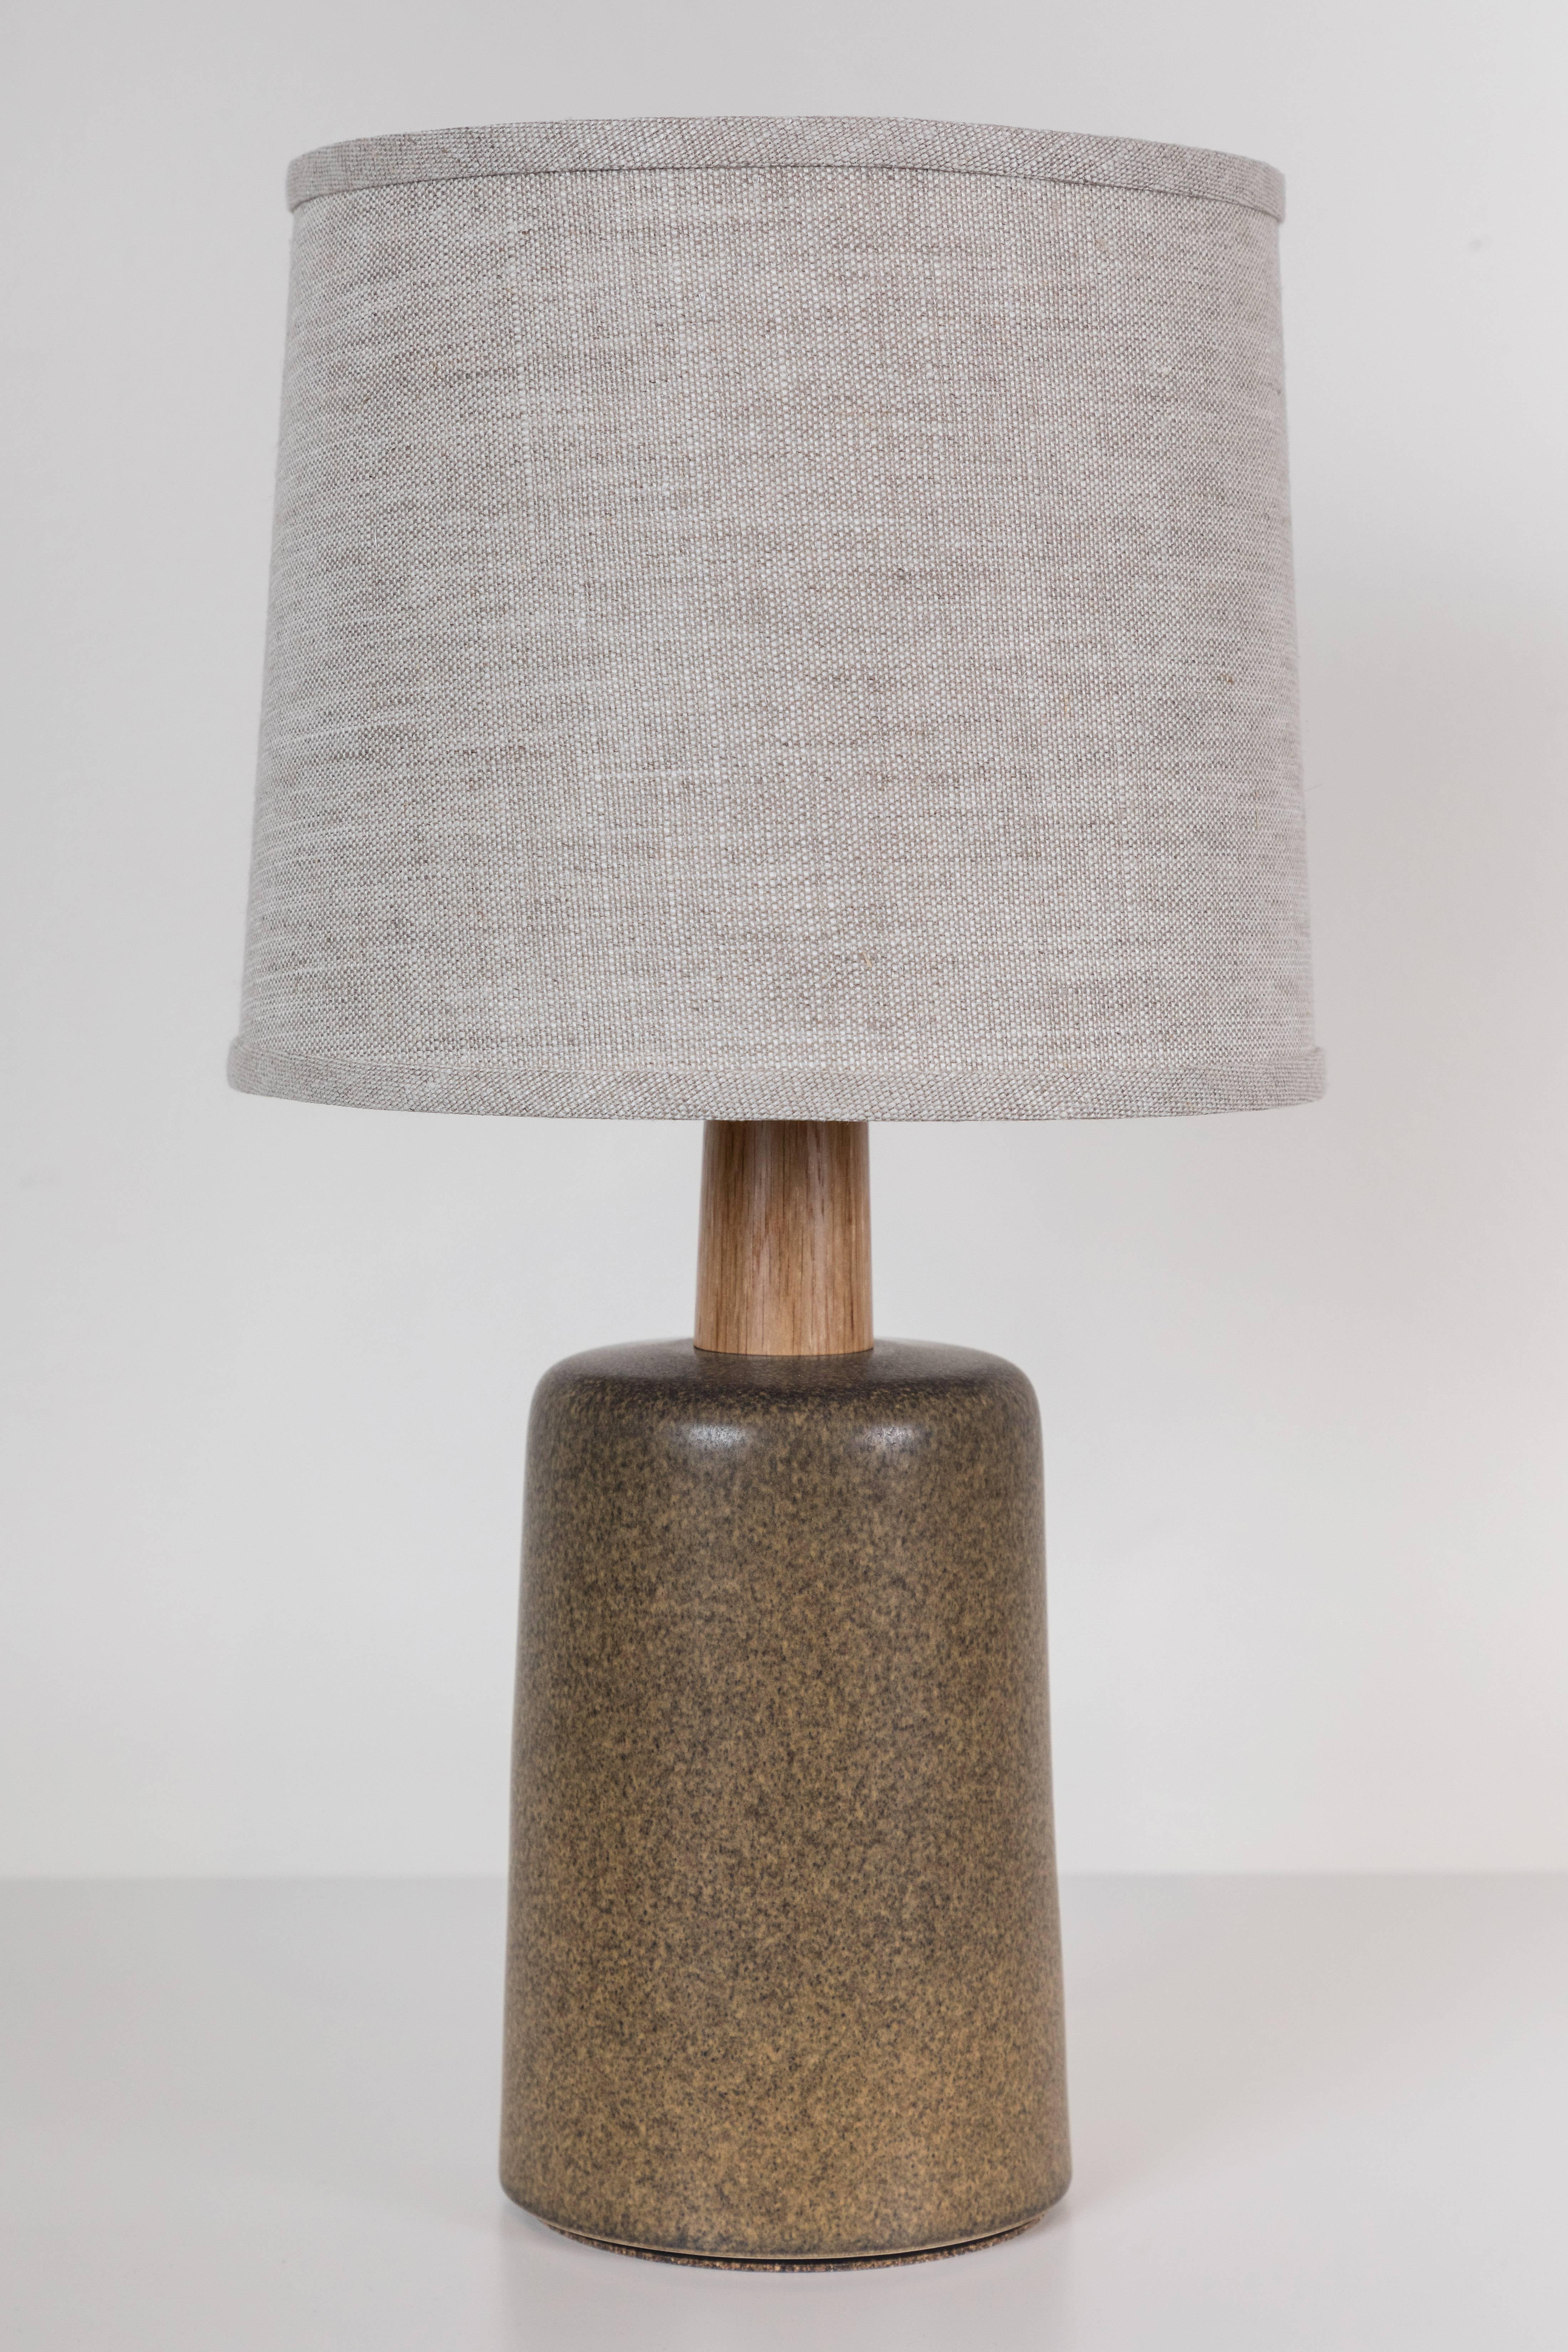 Pair of Griffin lamps by stone and sawyer for Lawson-Fenning